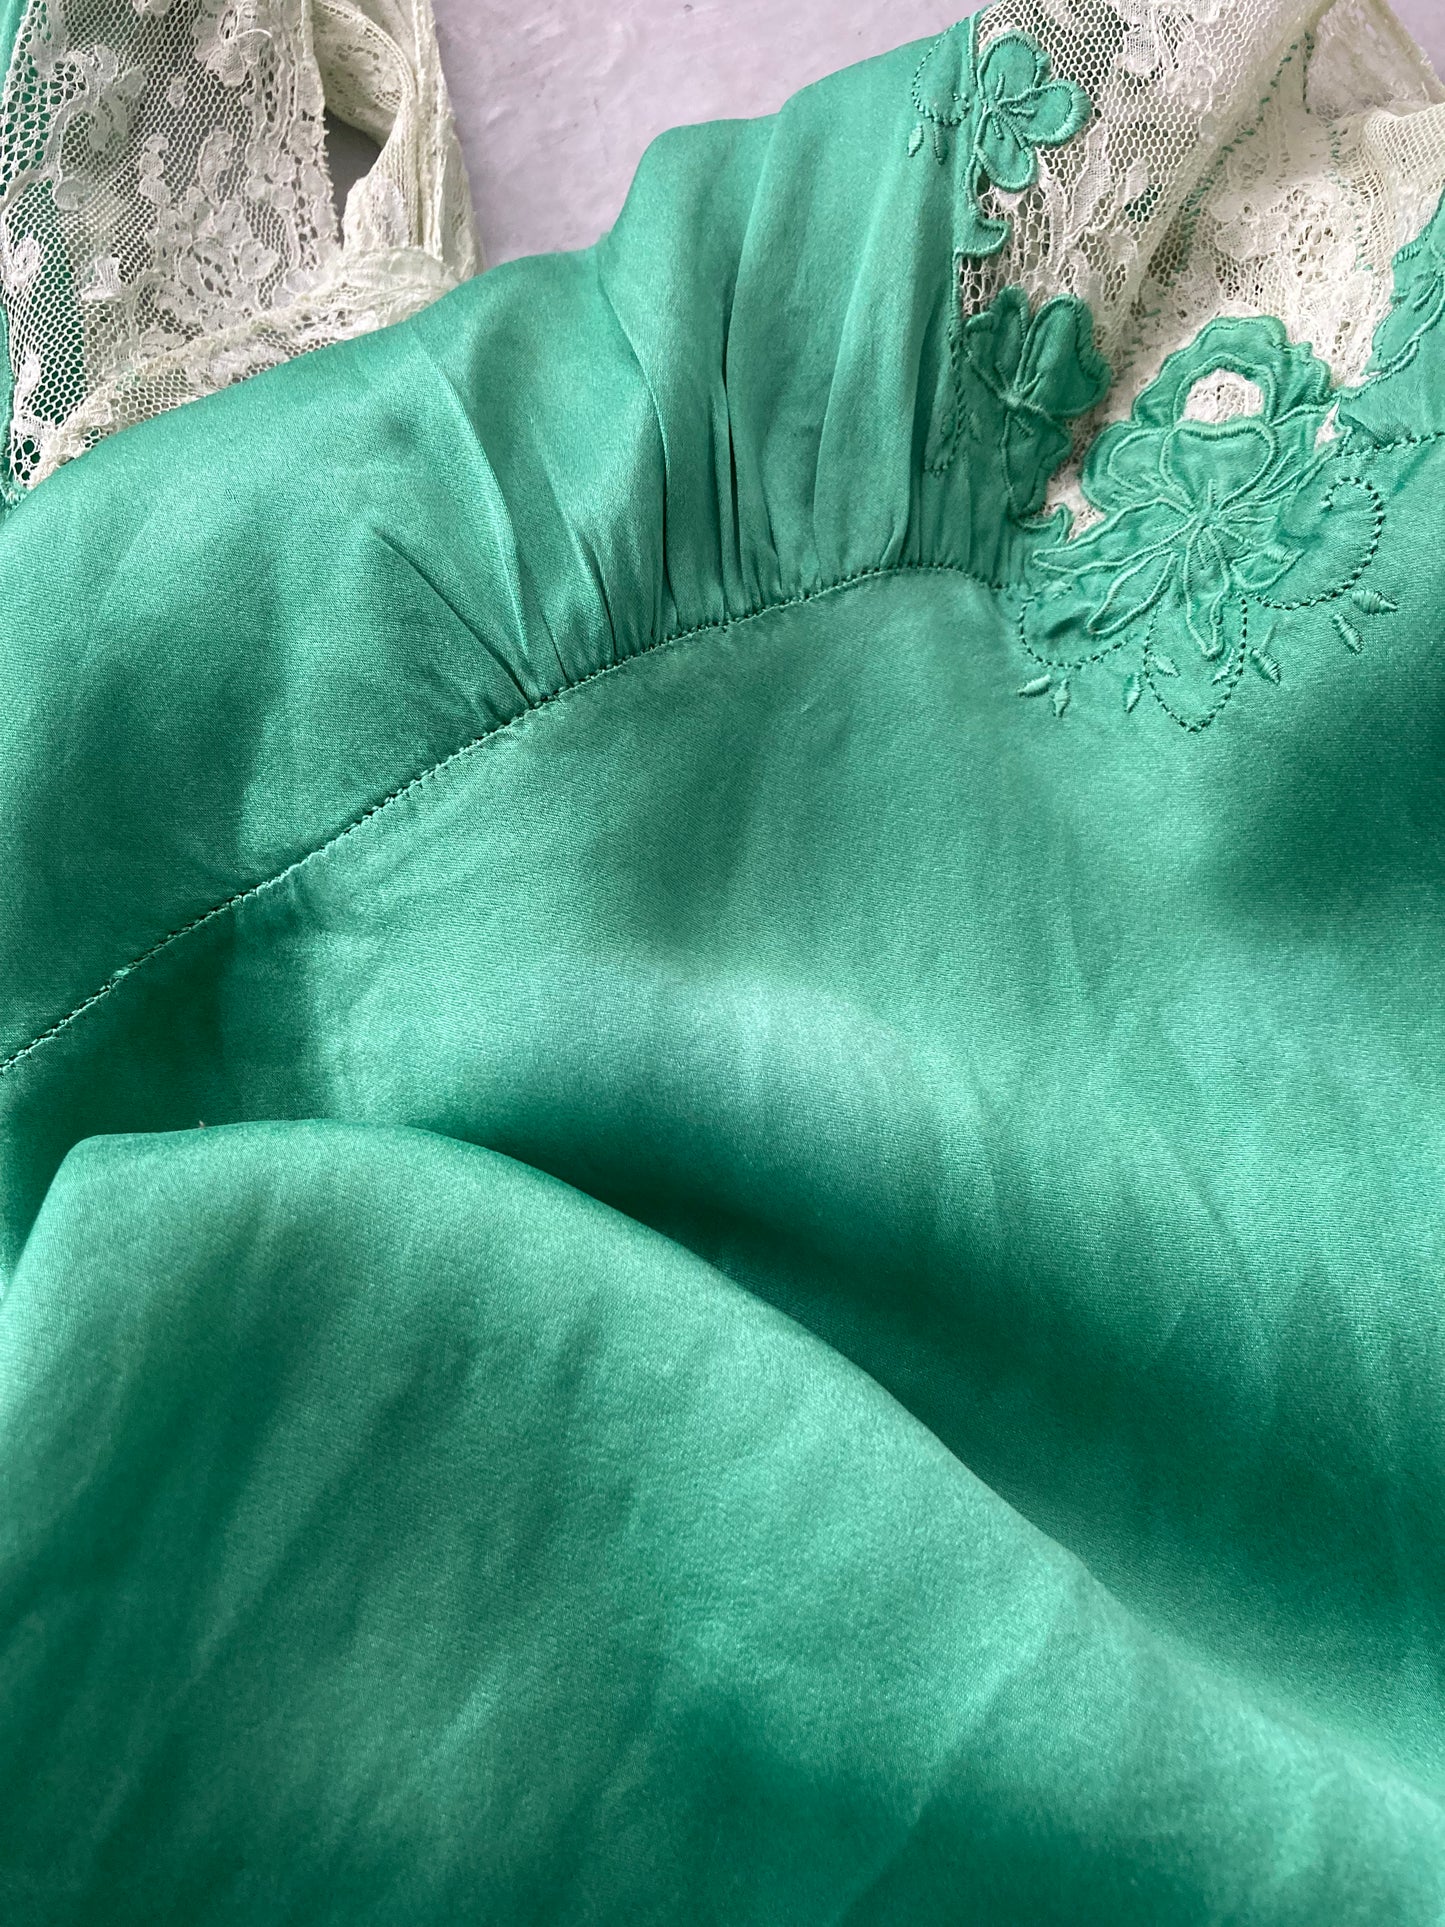 1930s Dyed Silk Floral Lace Gown - Emerald